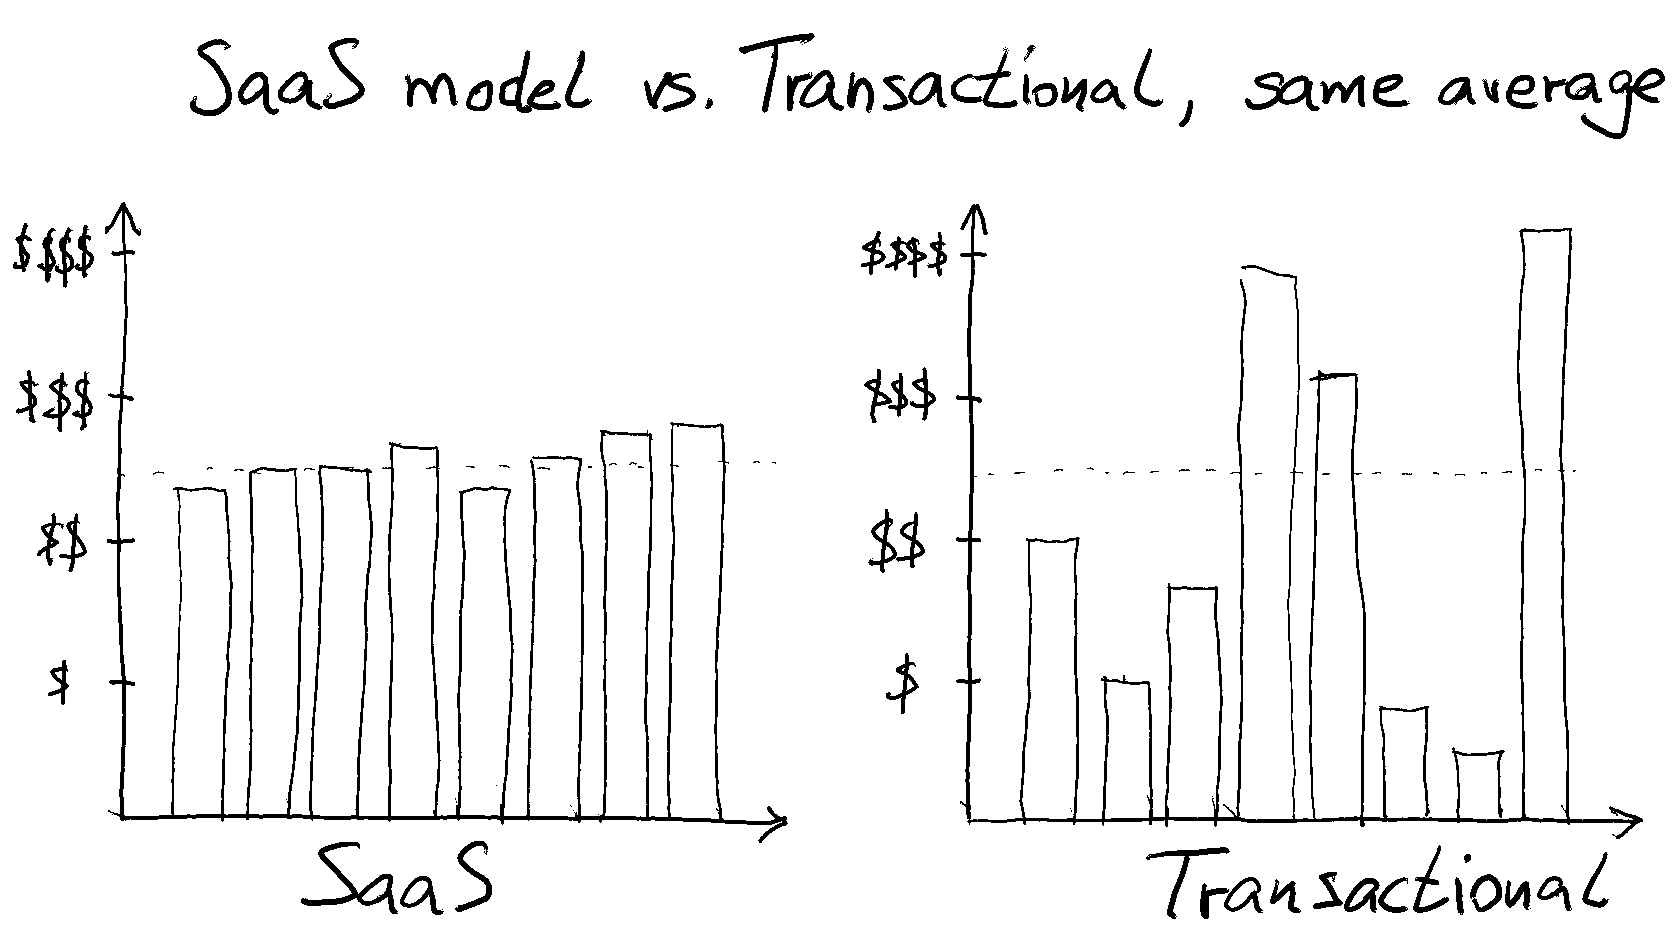 Charts illustrating typical month-by-month revenue for a SaaS business versus a business that sells transactionally.